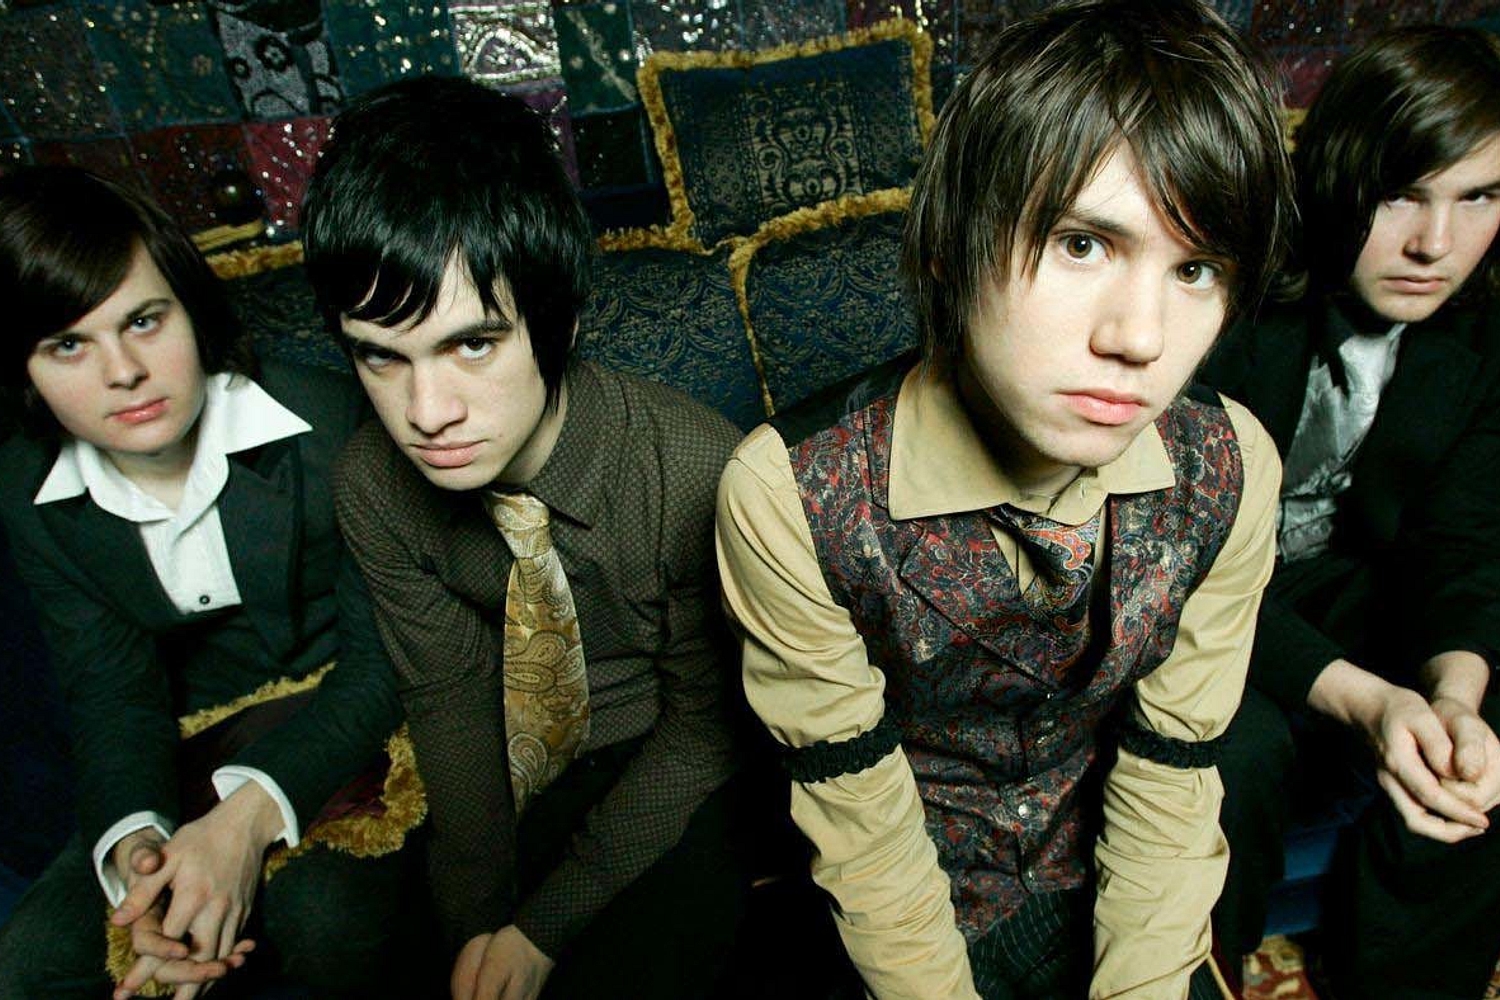 Time to dance: Looking back on Panic! At The Disco’s ‘A Fever You Can’t Sweat Out’